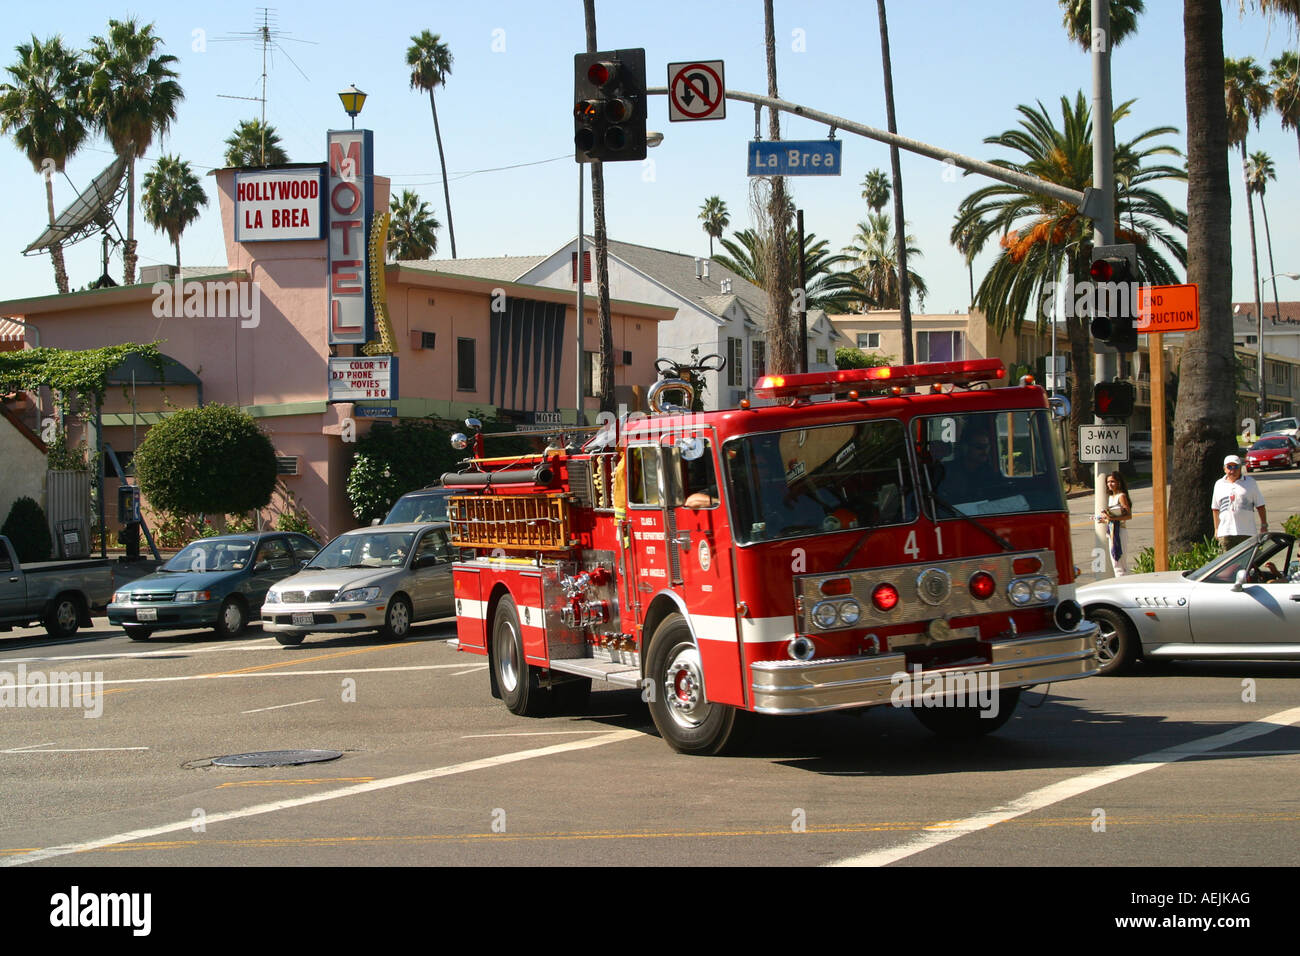 Fire-fighter in Hollywood Los Angeles California United States of America USA Stock Photo